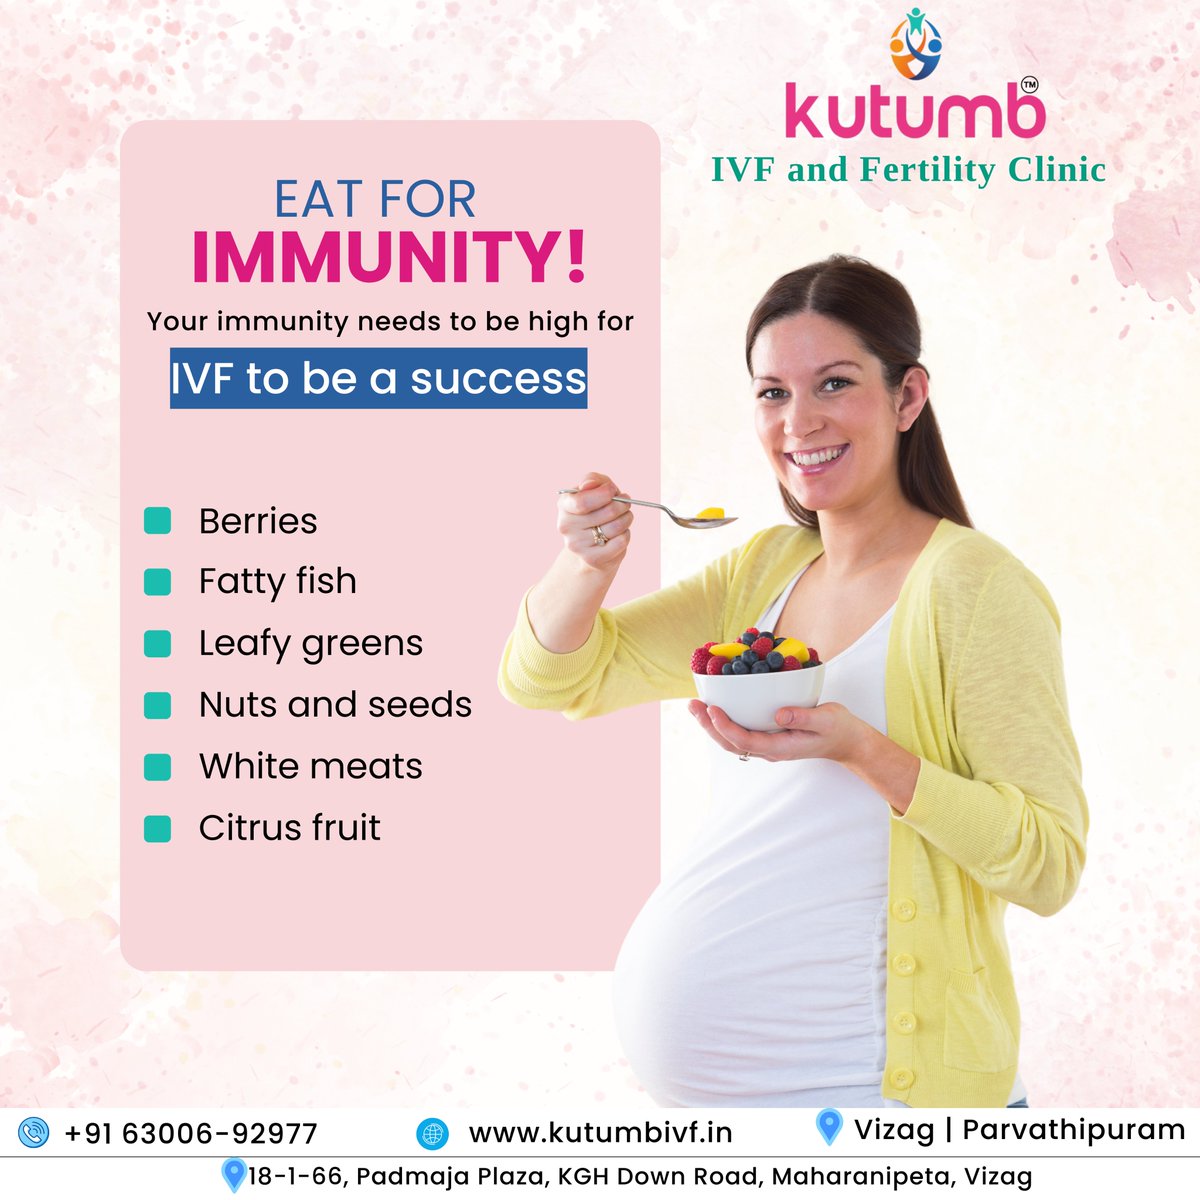 Strong immunity is key to IVF success! Book an appointment now, call us at +916300692977 #FertilityTips #healthyeating #healthyeatingtips #healthyweight #InfertilitySolutions #ParenthoodDreams #BookNow #parenthoodgoals #ivf #ivfcost #testtubebaby #testtubebabycentre #ivftreatment